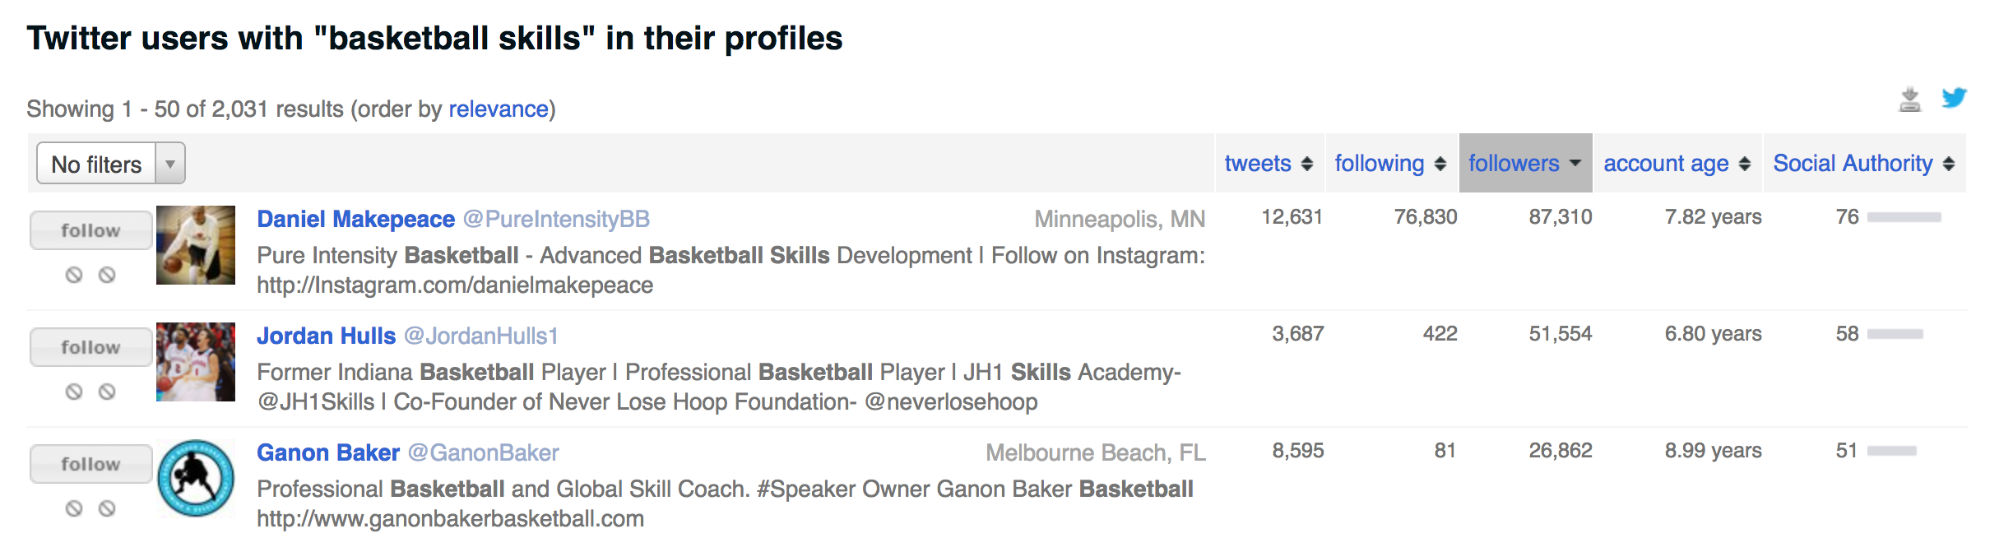 Screenshot showing twitter user results with "basketball skills" in their profile